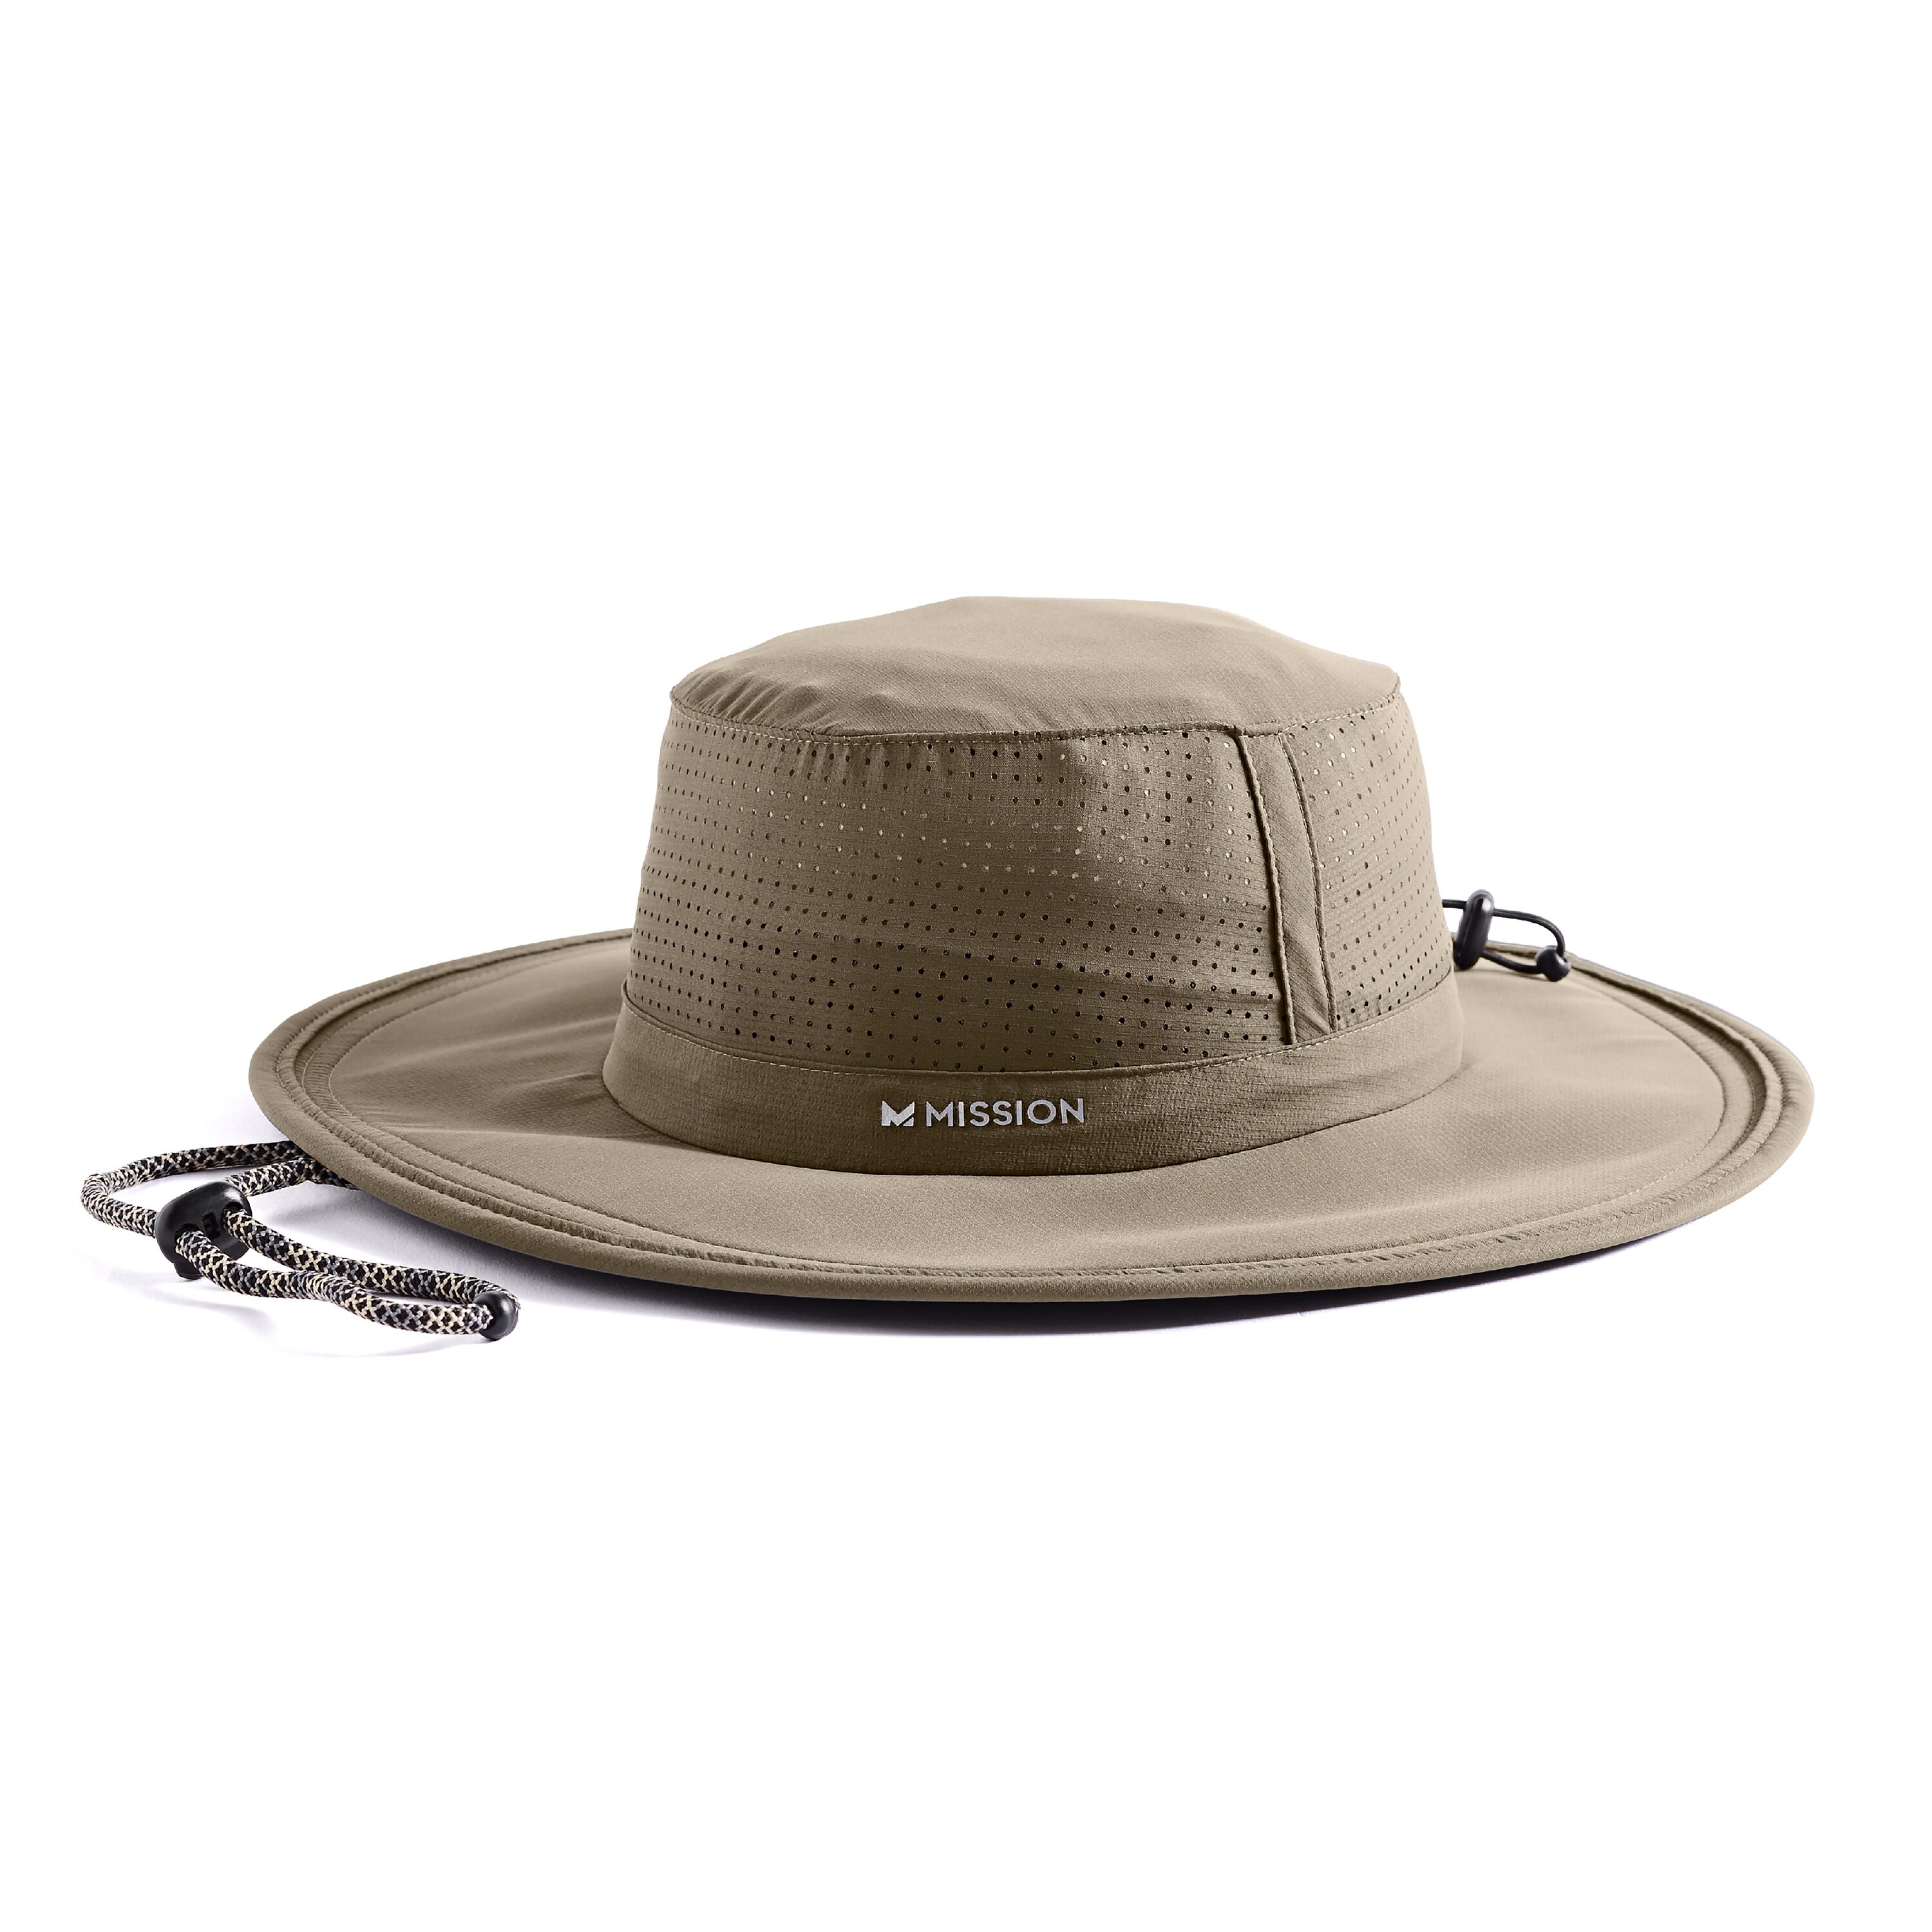 Mission Adult Unisex Cooling Hat - One Size Fits Most - Active - Cooling -  UPF 50 Sun Protection